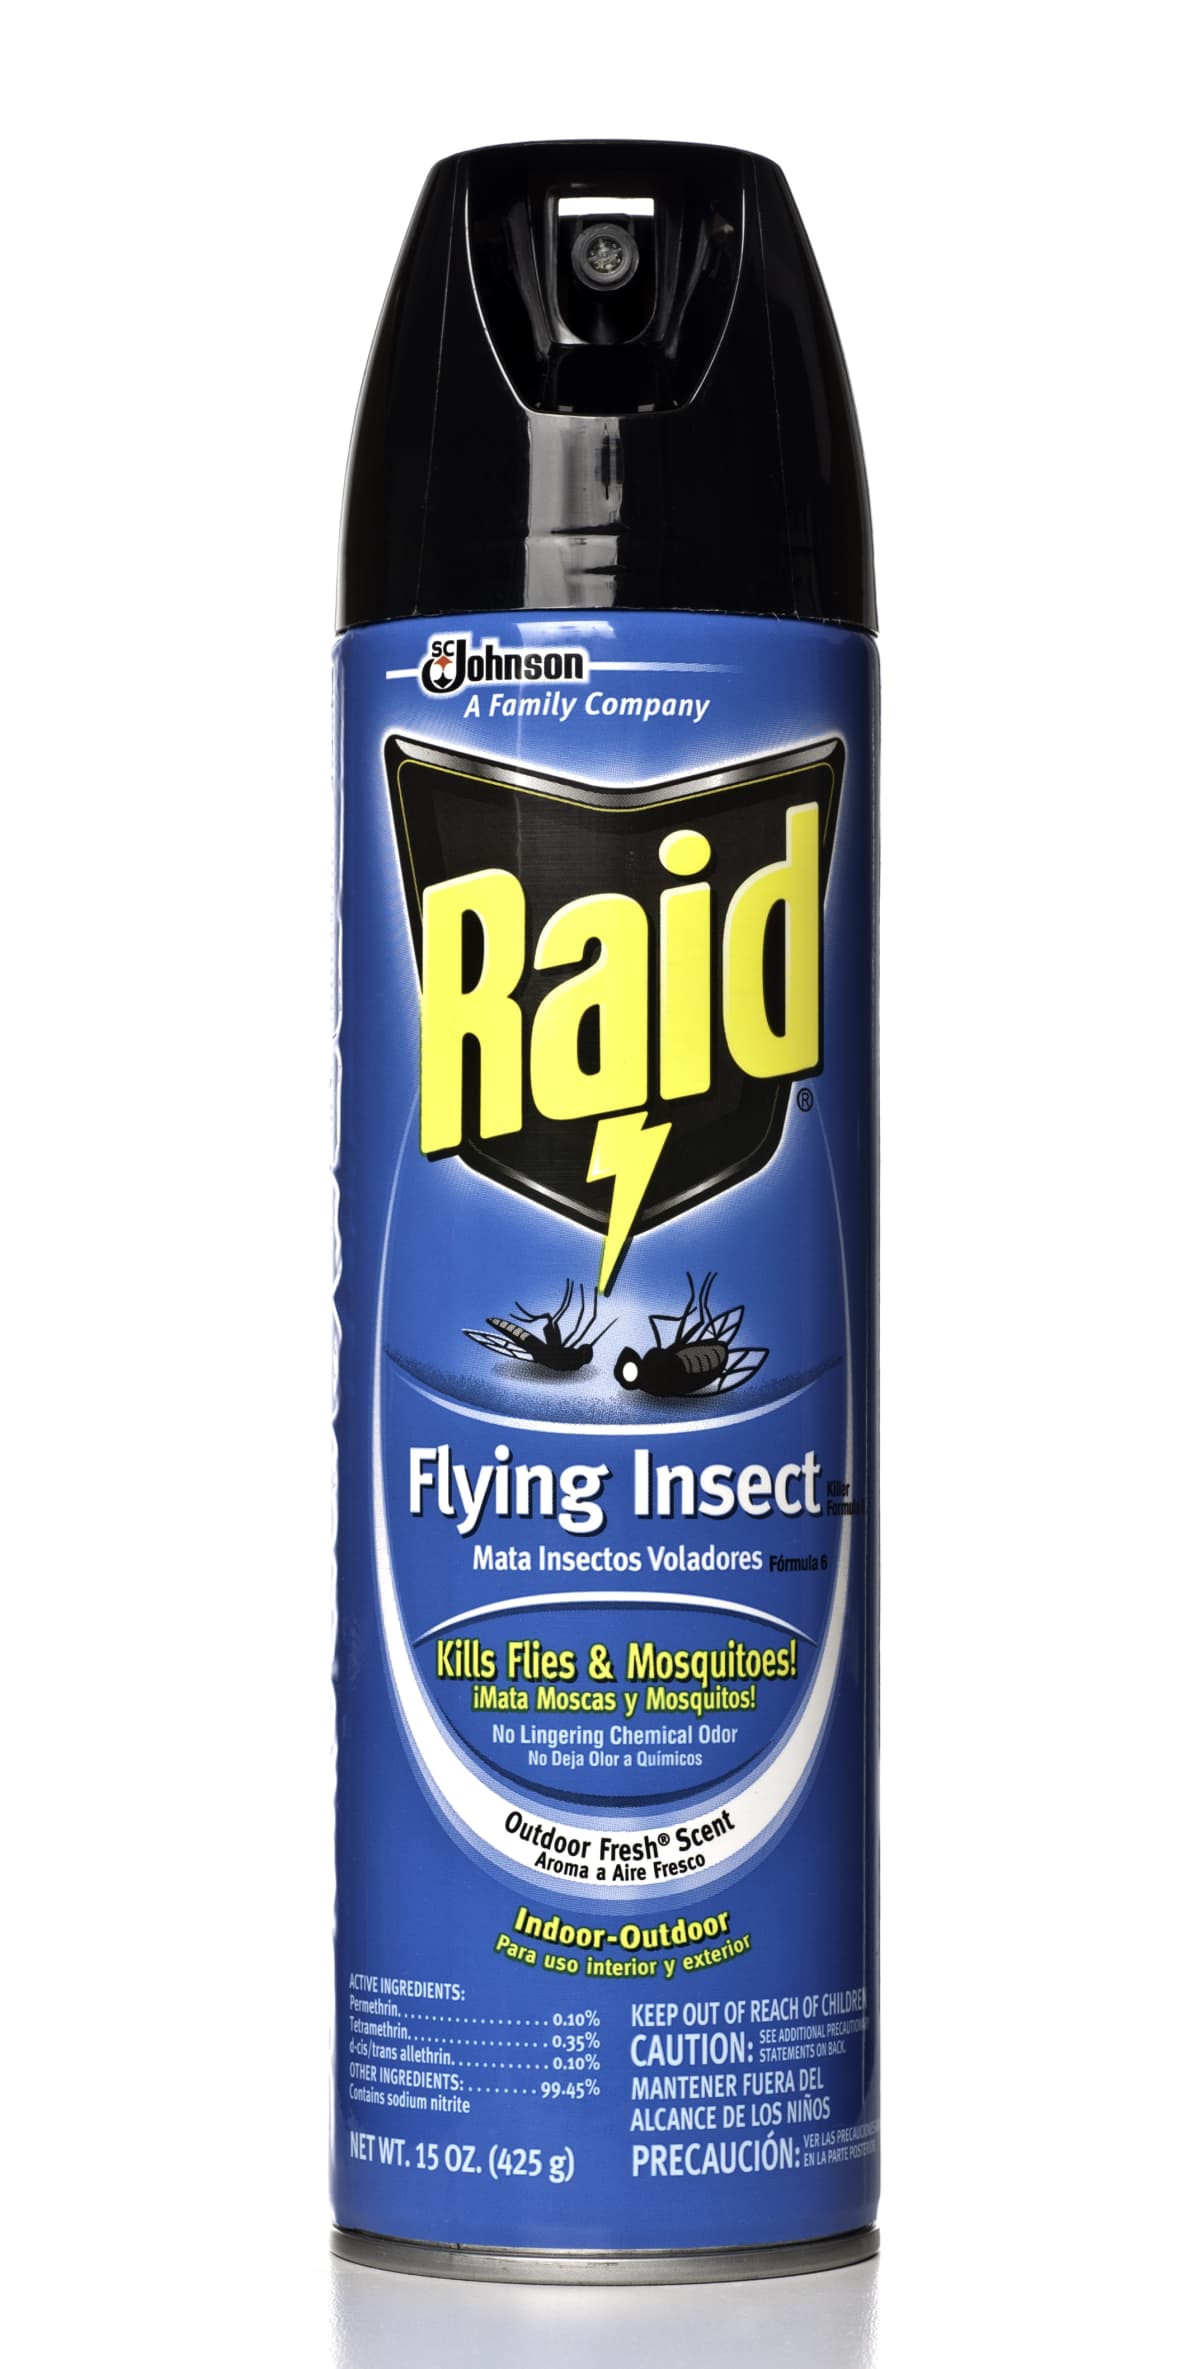 West Palm Beach, USA - August 27, 2011: This is a closeup view of a can of Raid Wasp and Hornet spray insecticide. Raid is manufactured by SC Johnson.